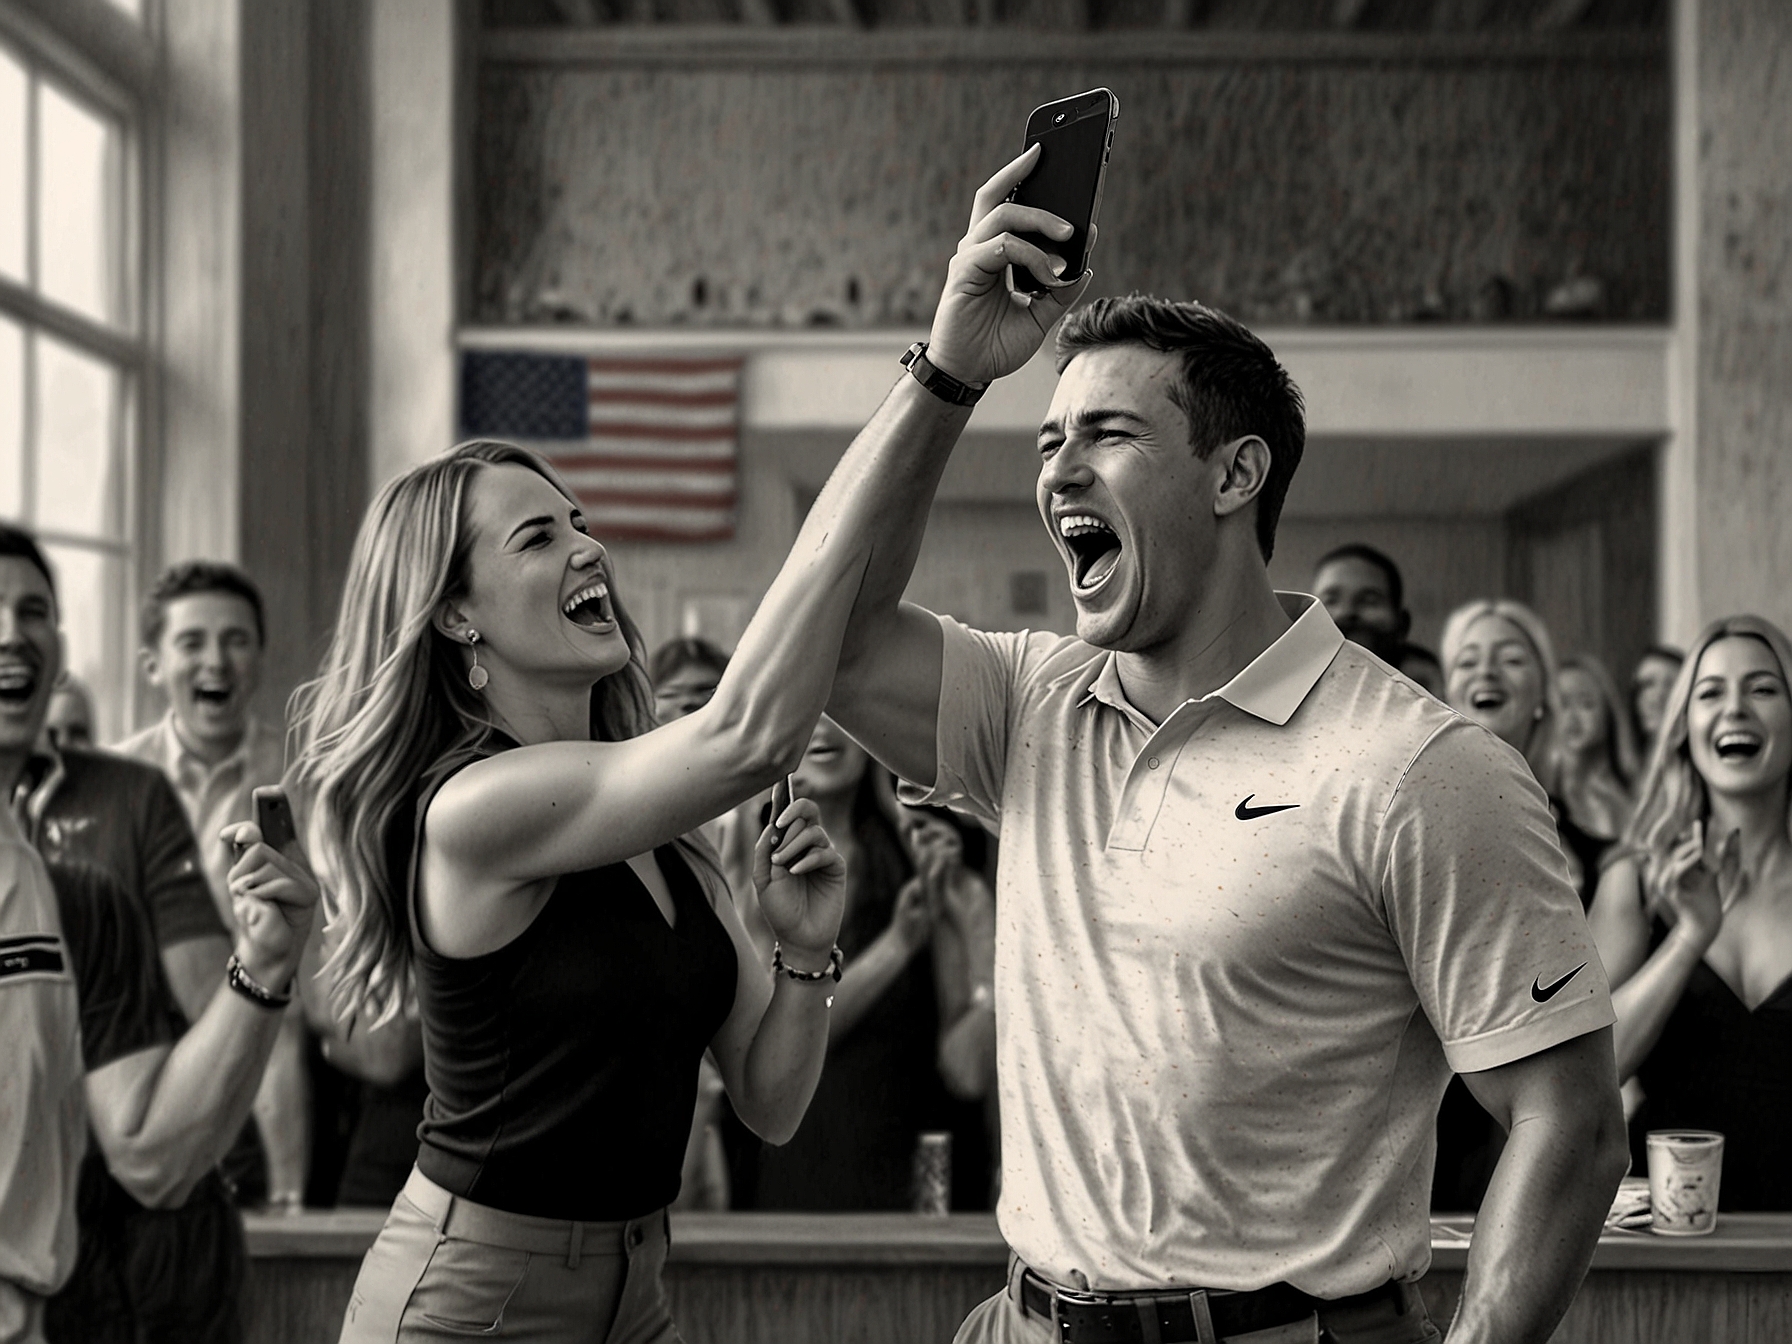 Jena Sims capturing the rowdy celebration on her phone, with Brooks Koepka dancing and singing along to victory anthems, reflecting their exuberant celebration.